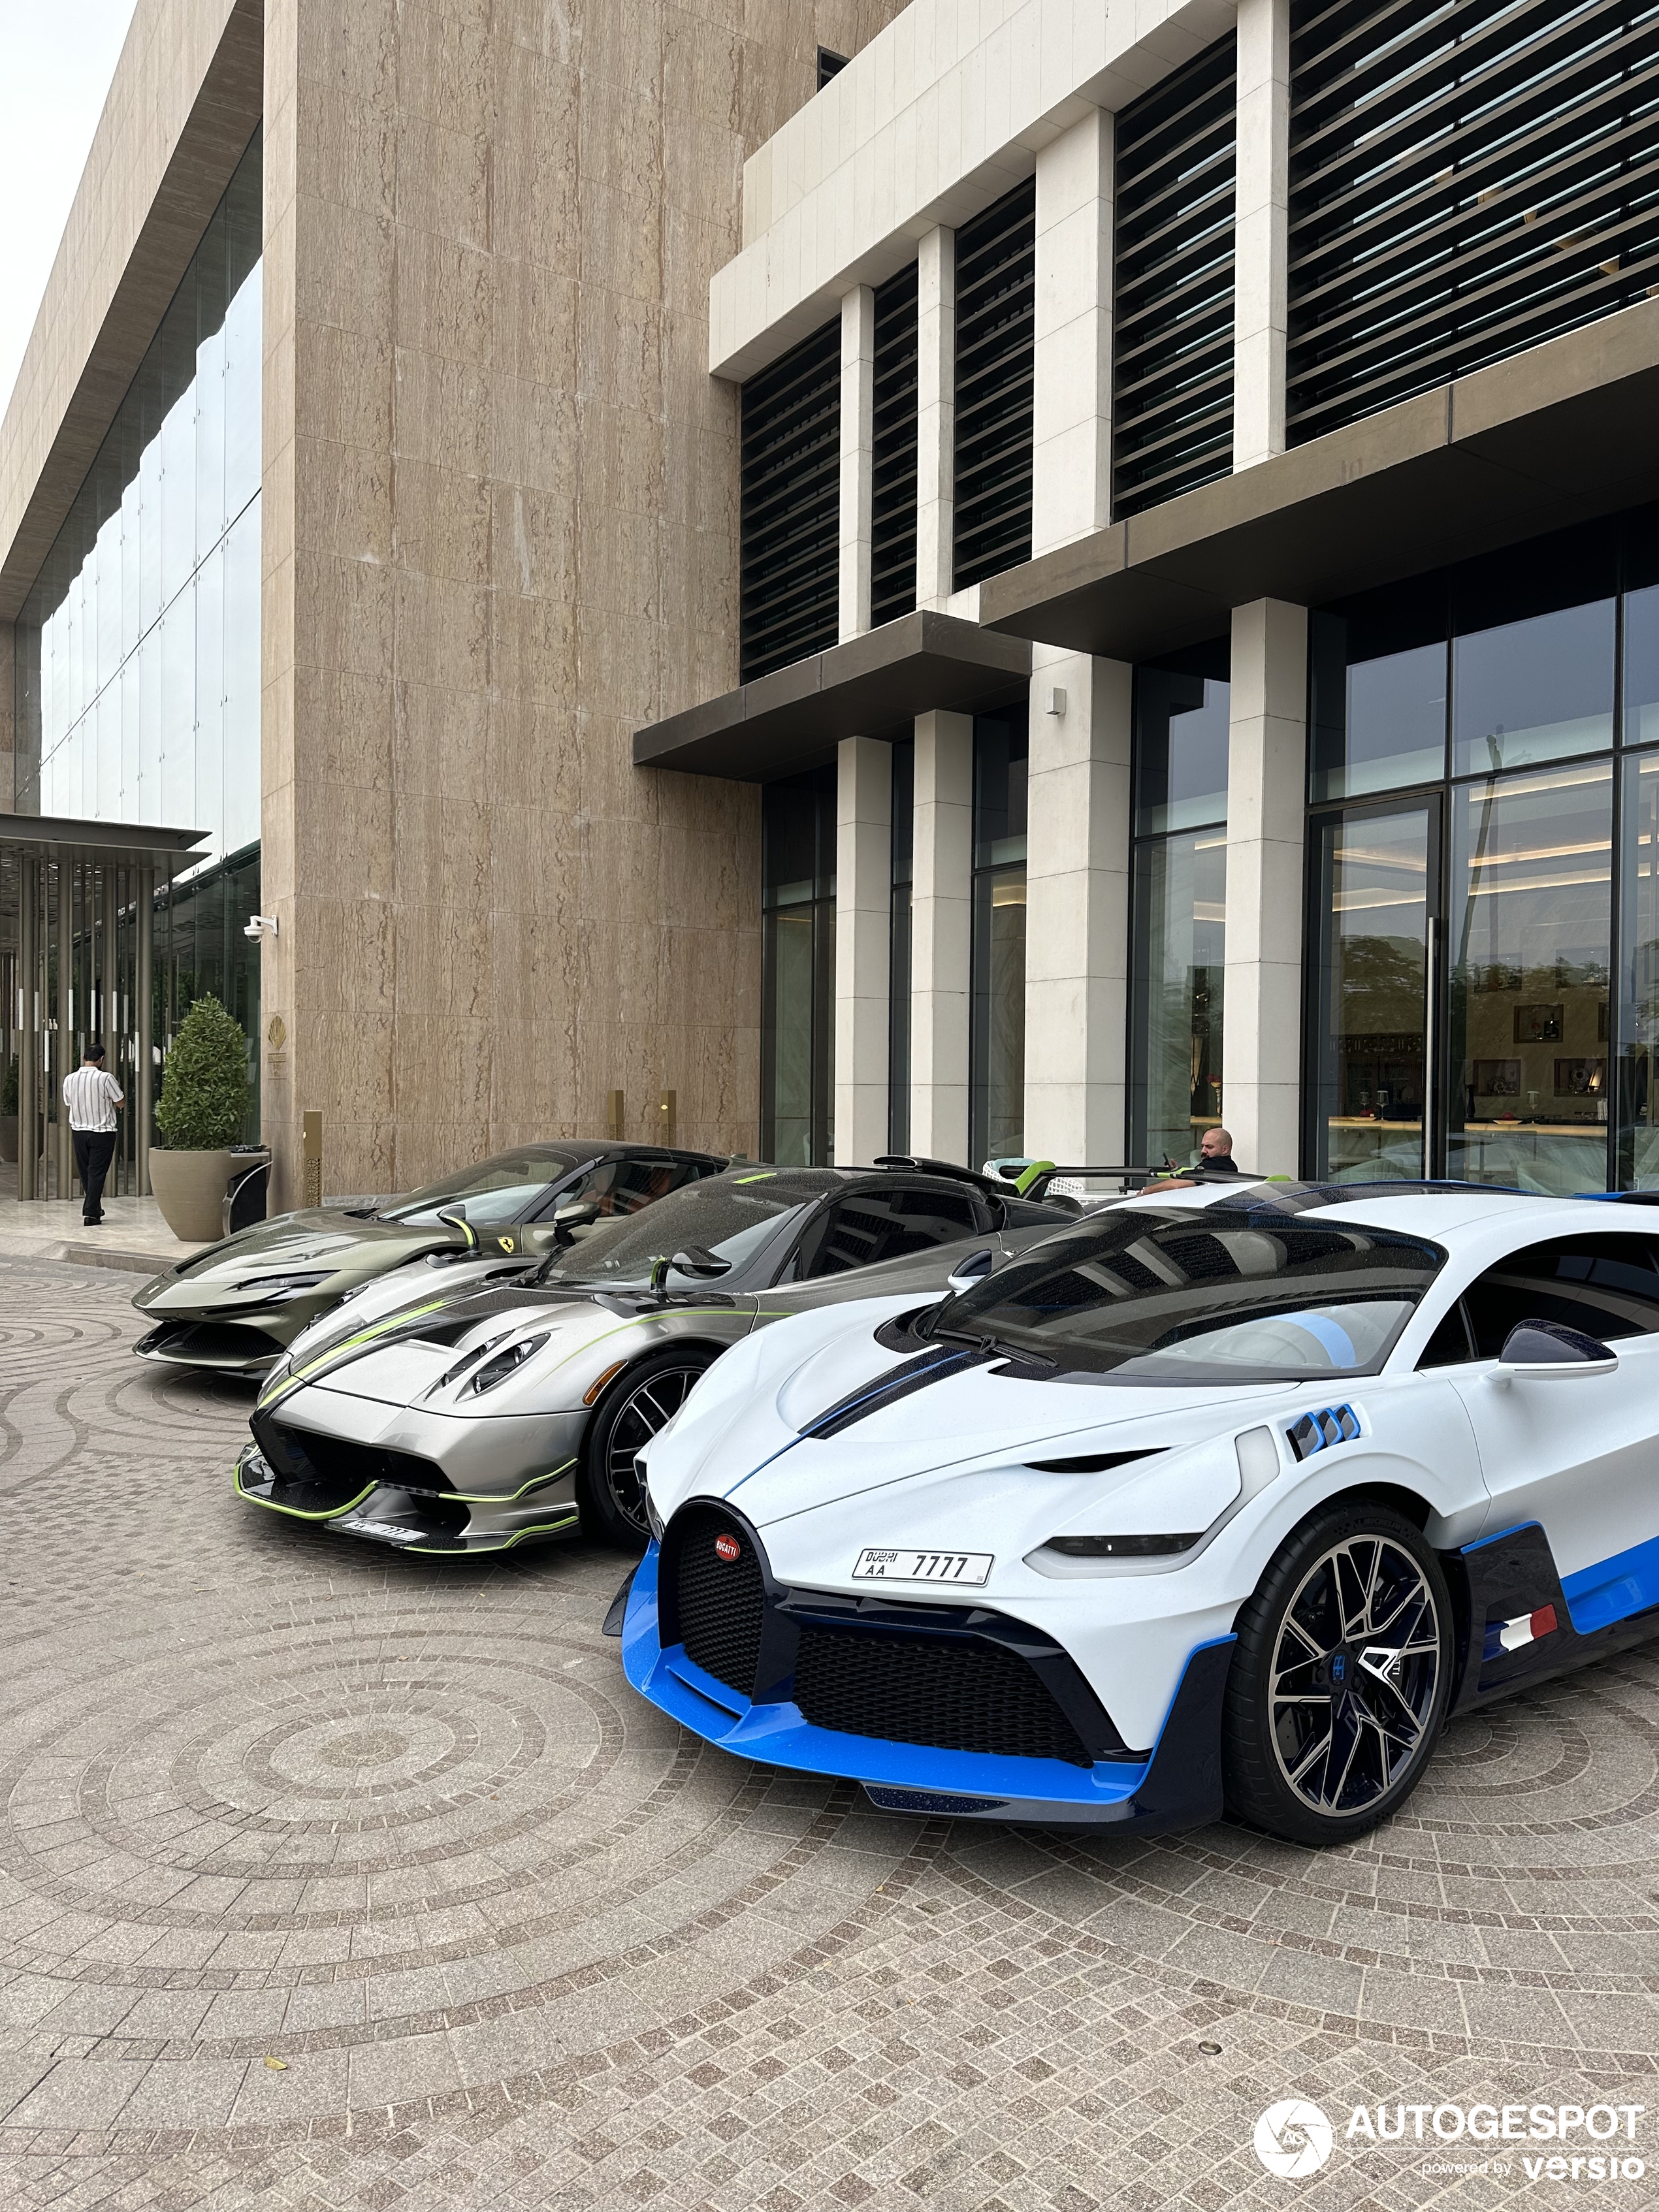 Another Combination of Hypercars shows up in Dubai